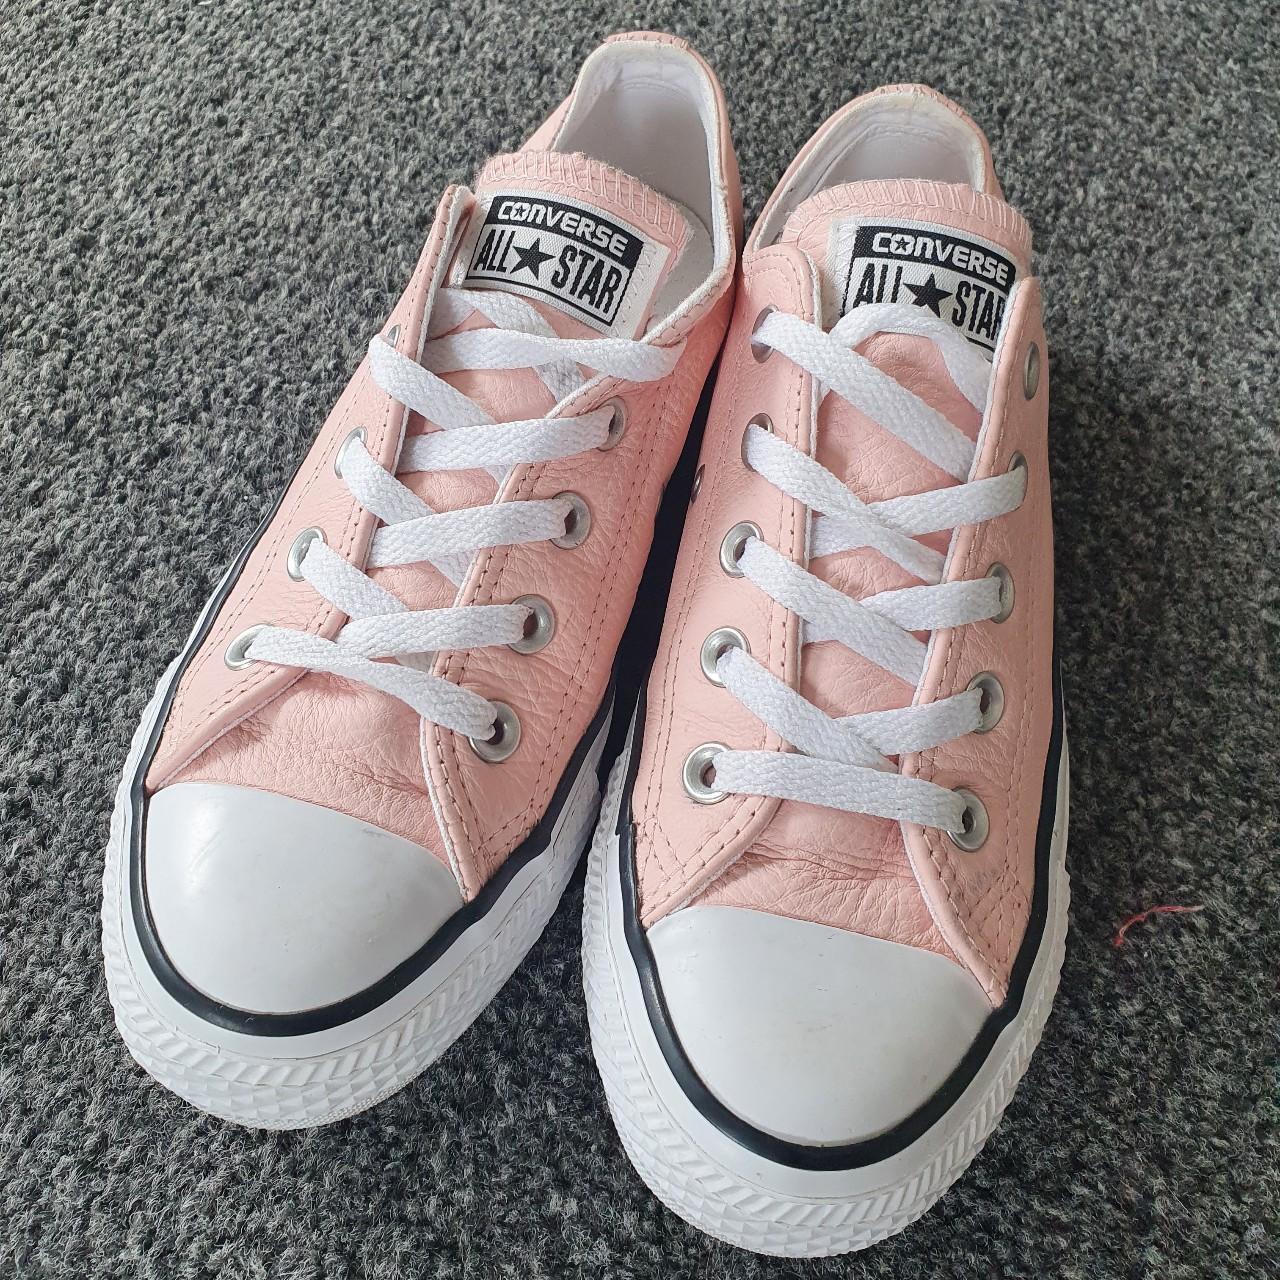 pale pink leather converse